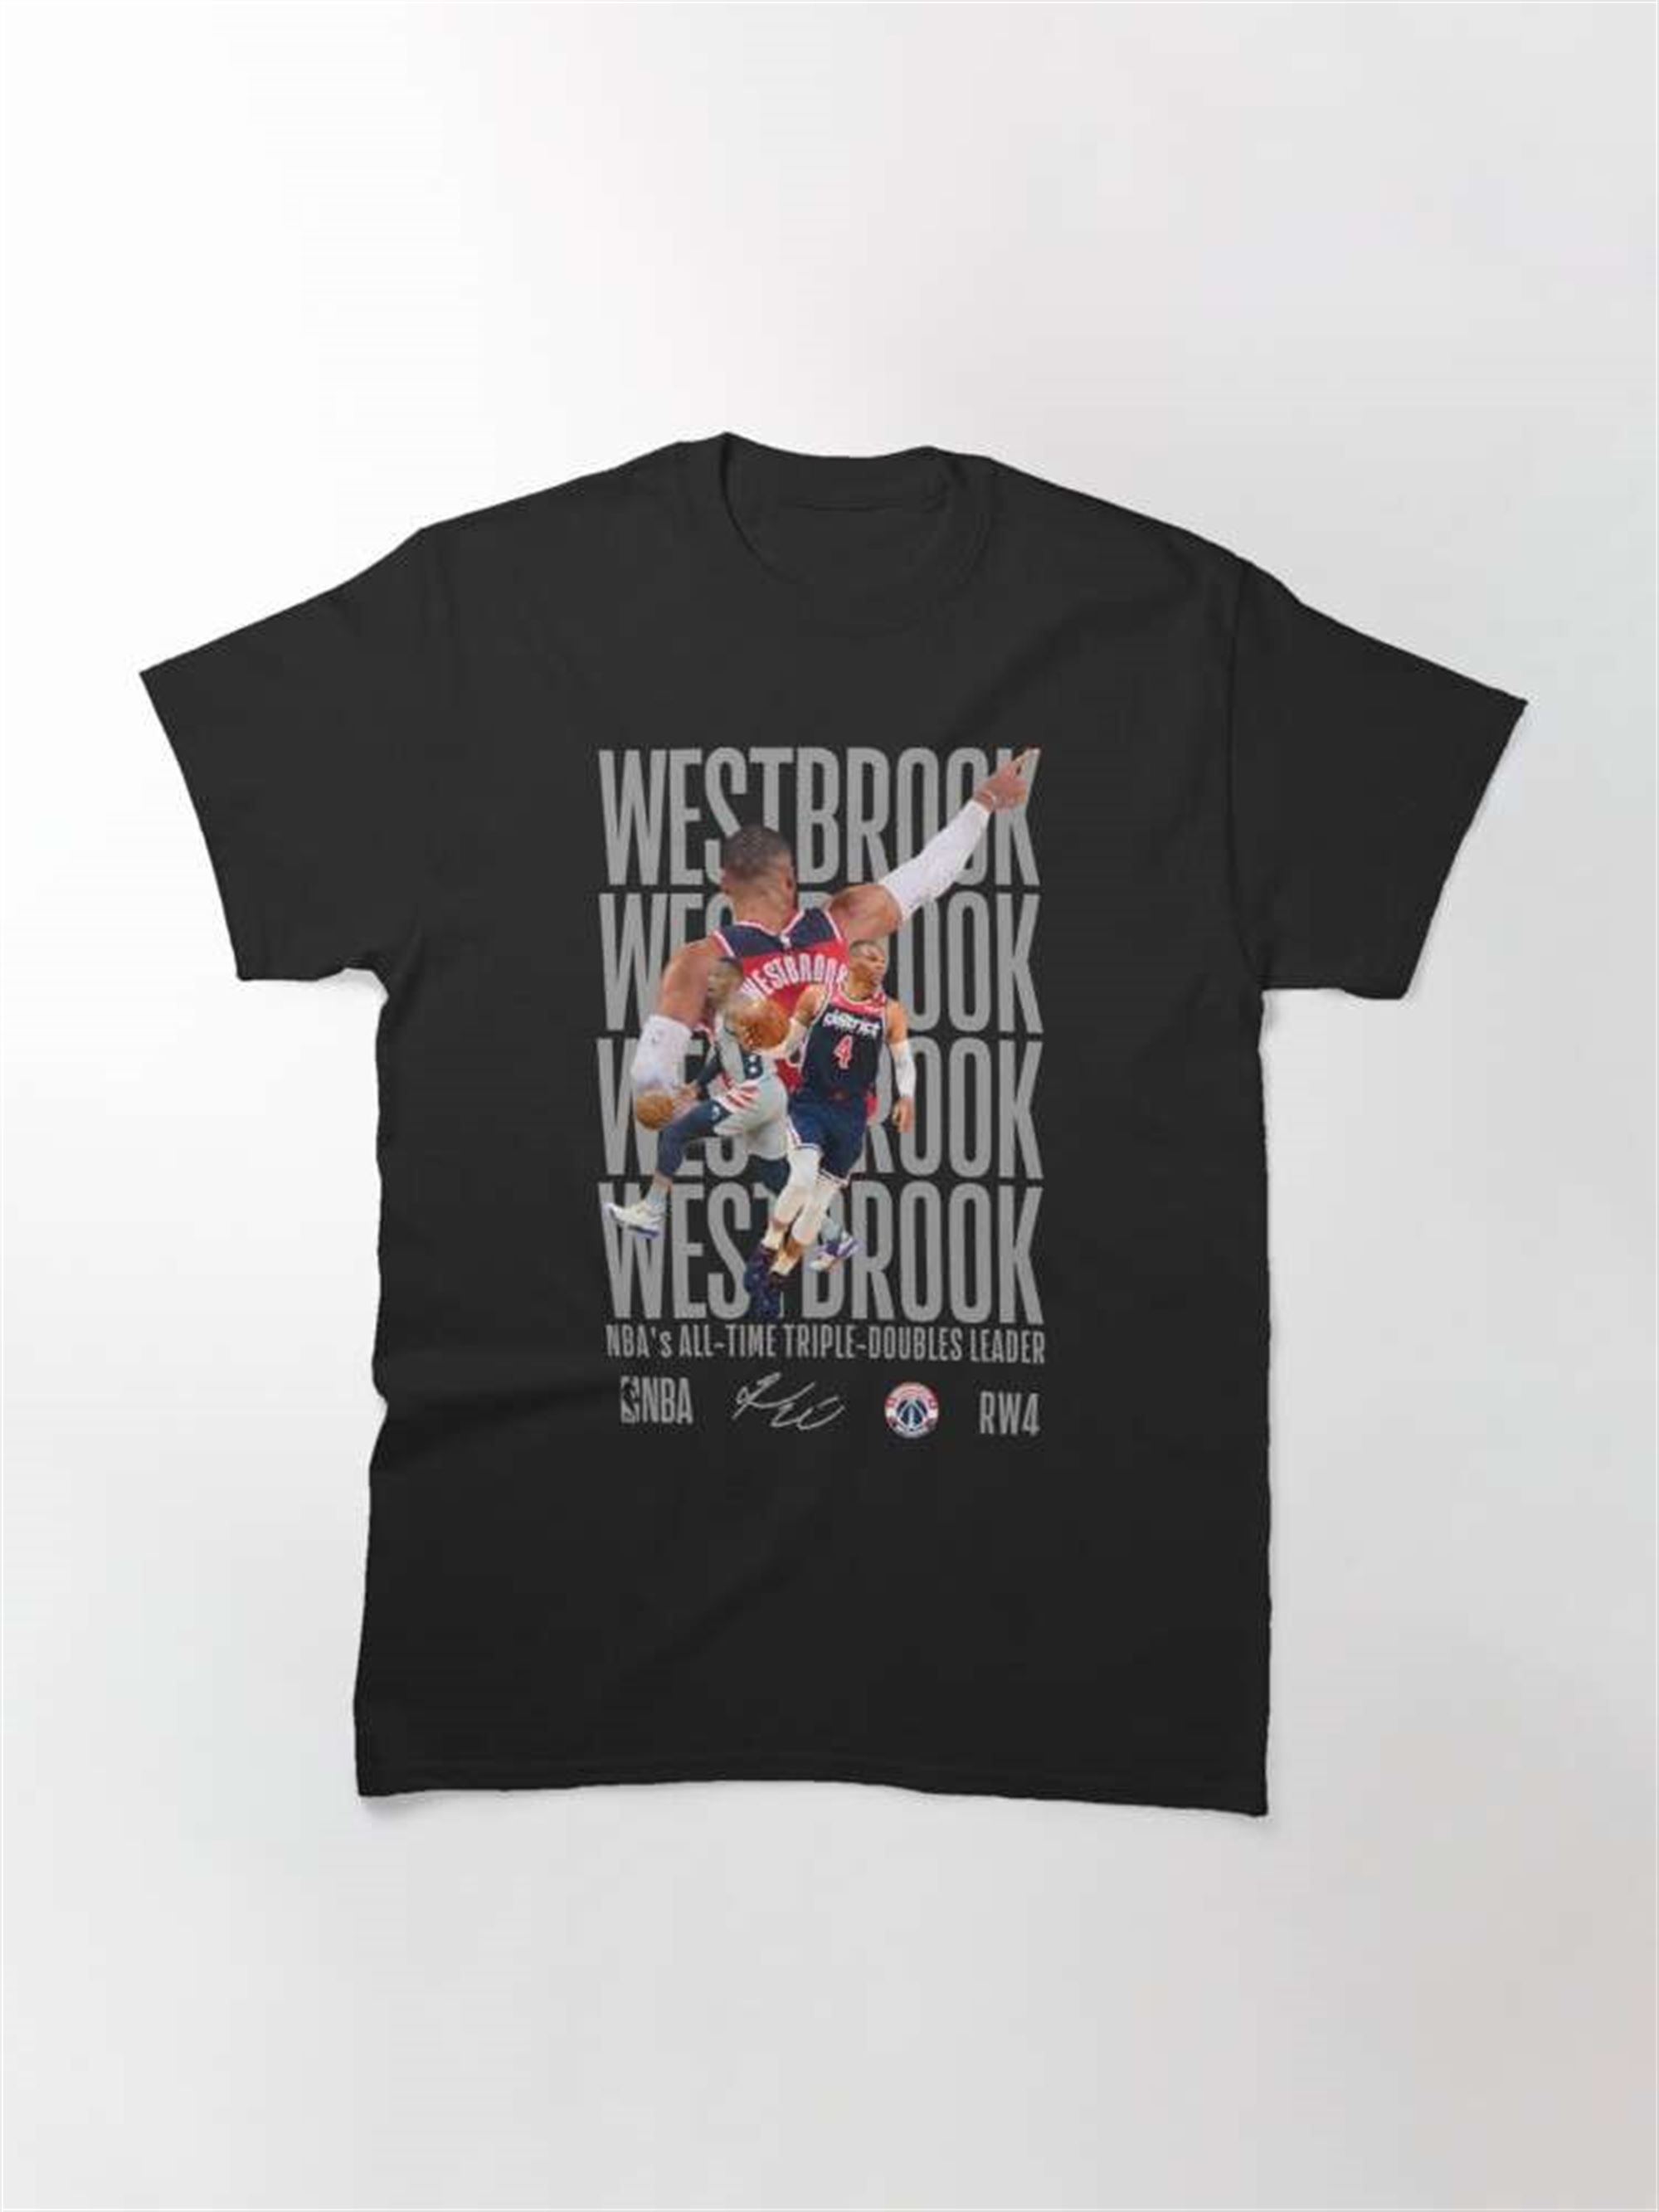 Russell Westbrook Nba All Time Triple Doubles Leader T Shirt Size Up To 5xl